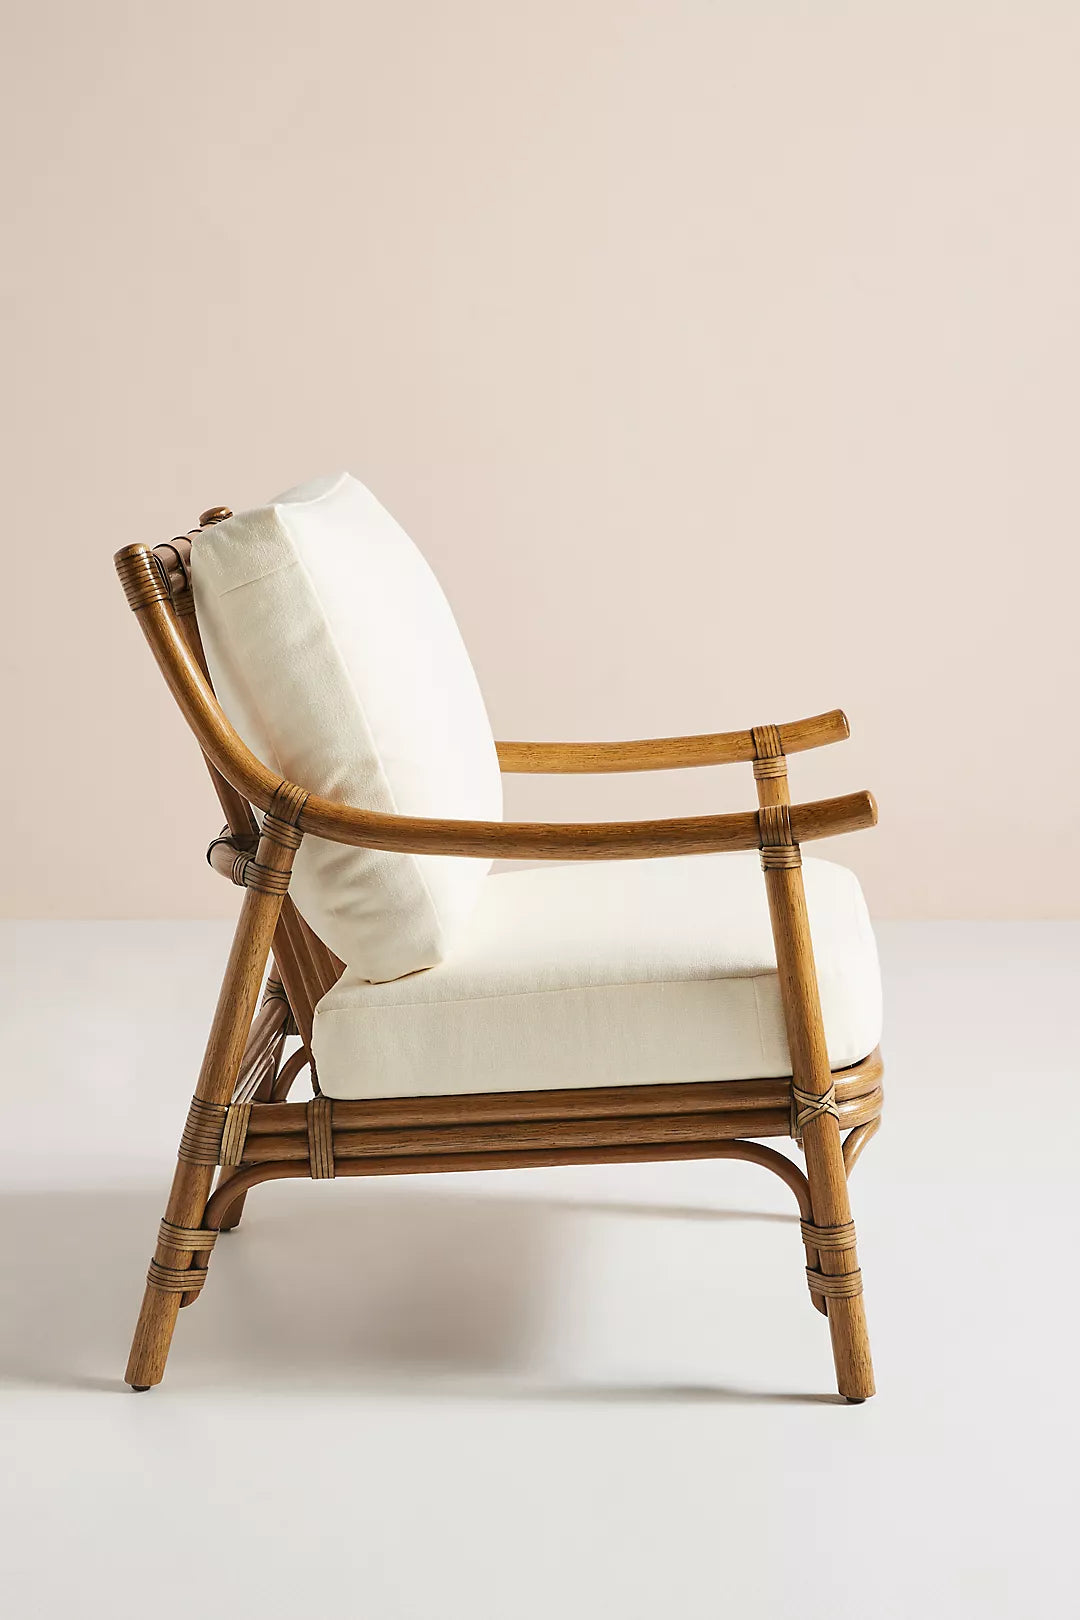 Cane Chair for Lounge | Bamboo chairs for garden - Anala - Akway